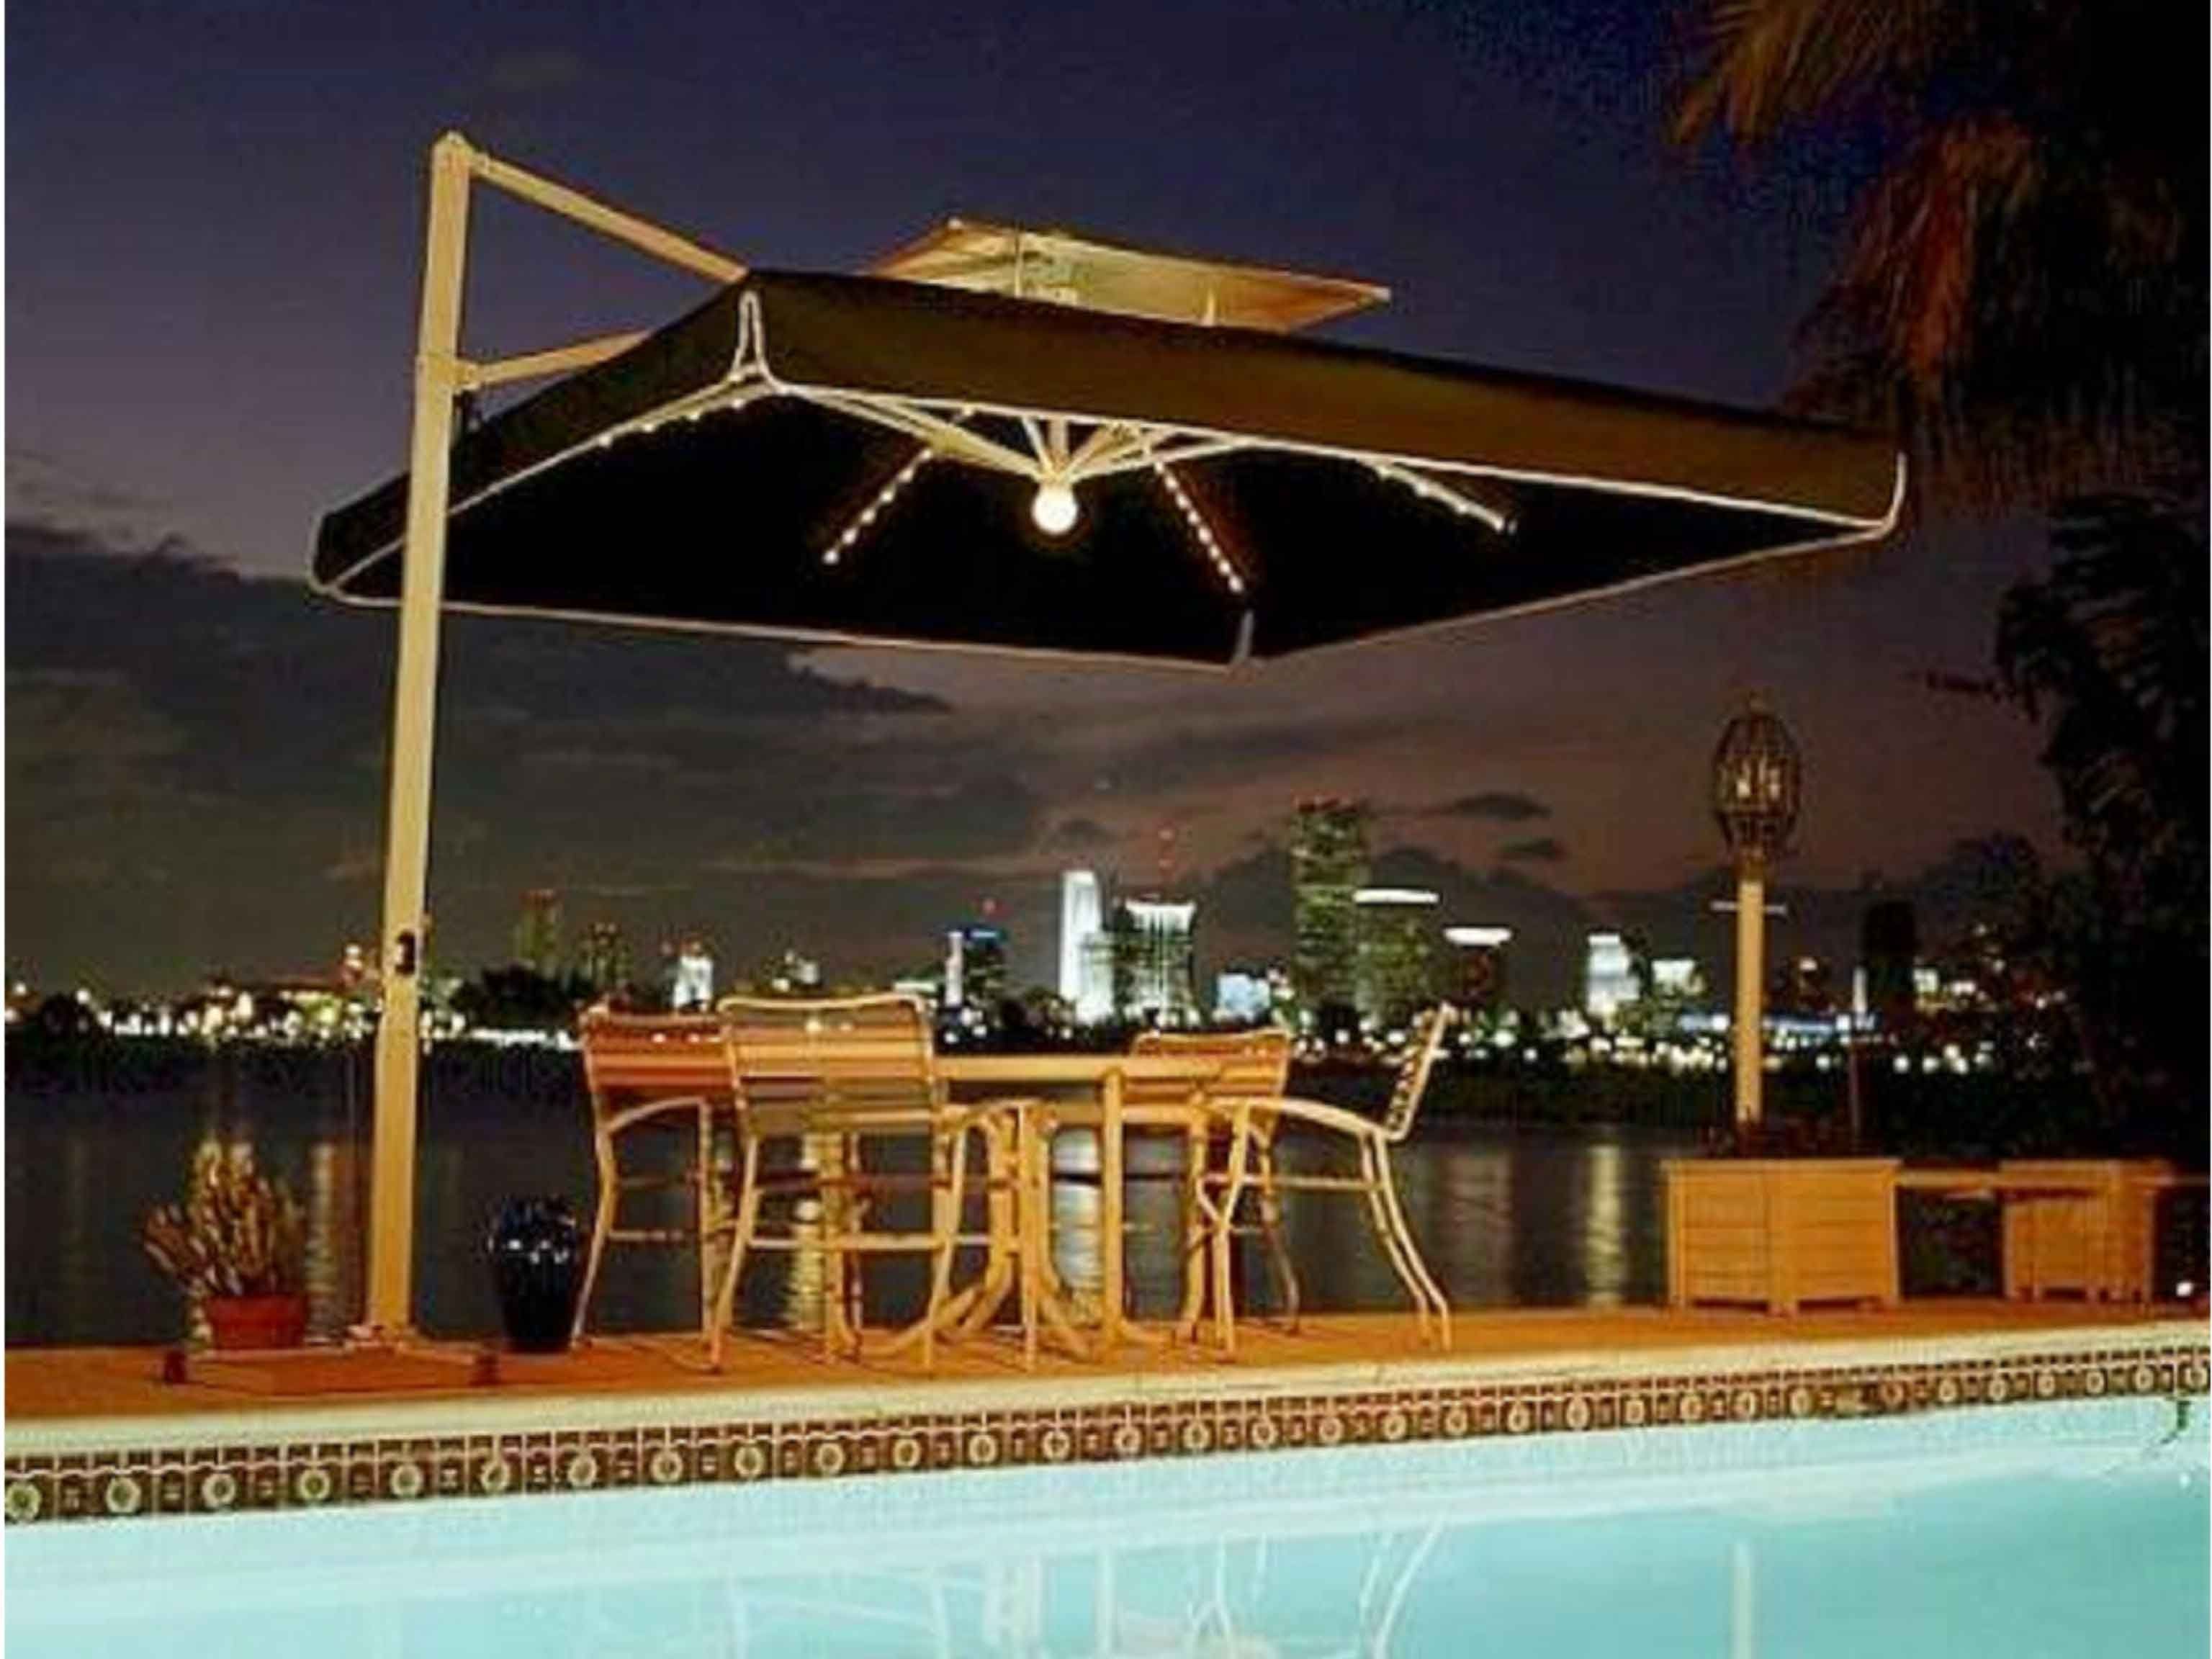 Patio Umbrellas With Led Lights Throughout Preferred Furniture: Patio Umbrellas Home Depot Bedroom Light Bathroom Light (View 12 of 20)